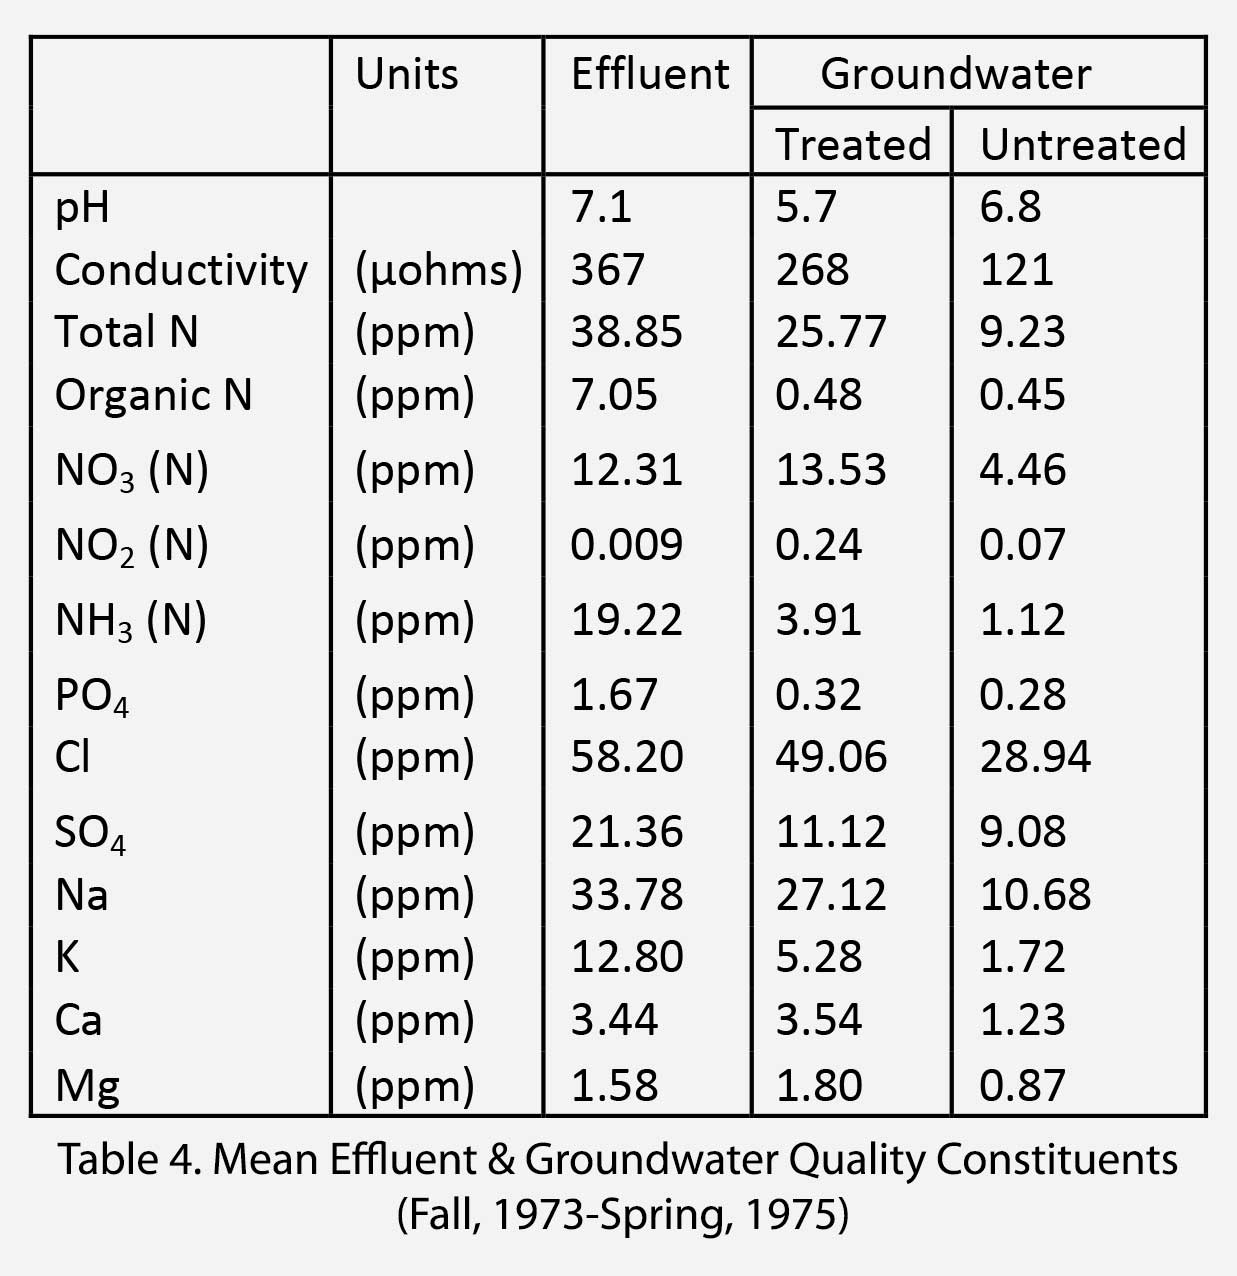 Table 4. Mean Effluent & Groundwater Quality Constituents (Fall, 1973-Spring, 1975)